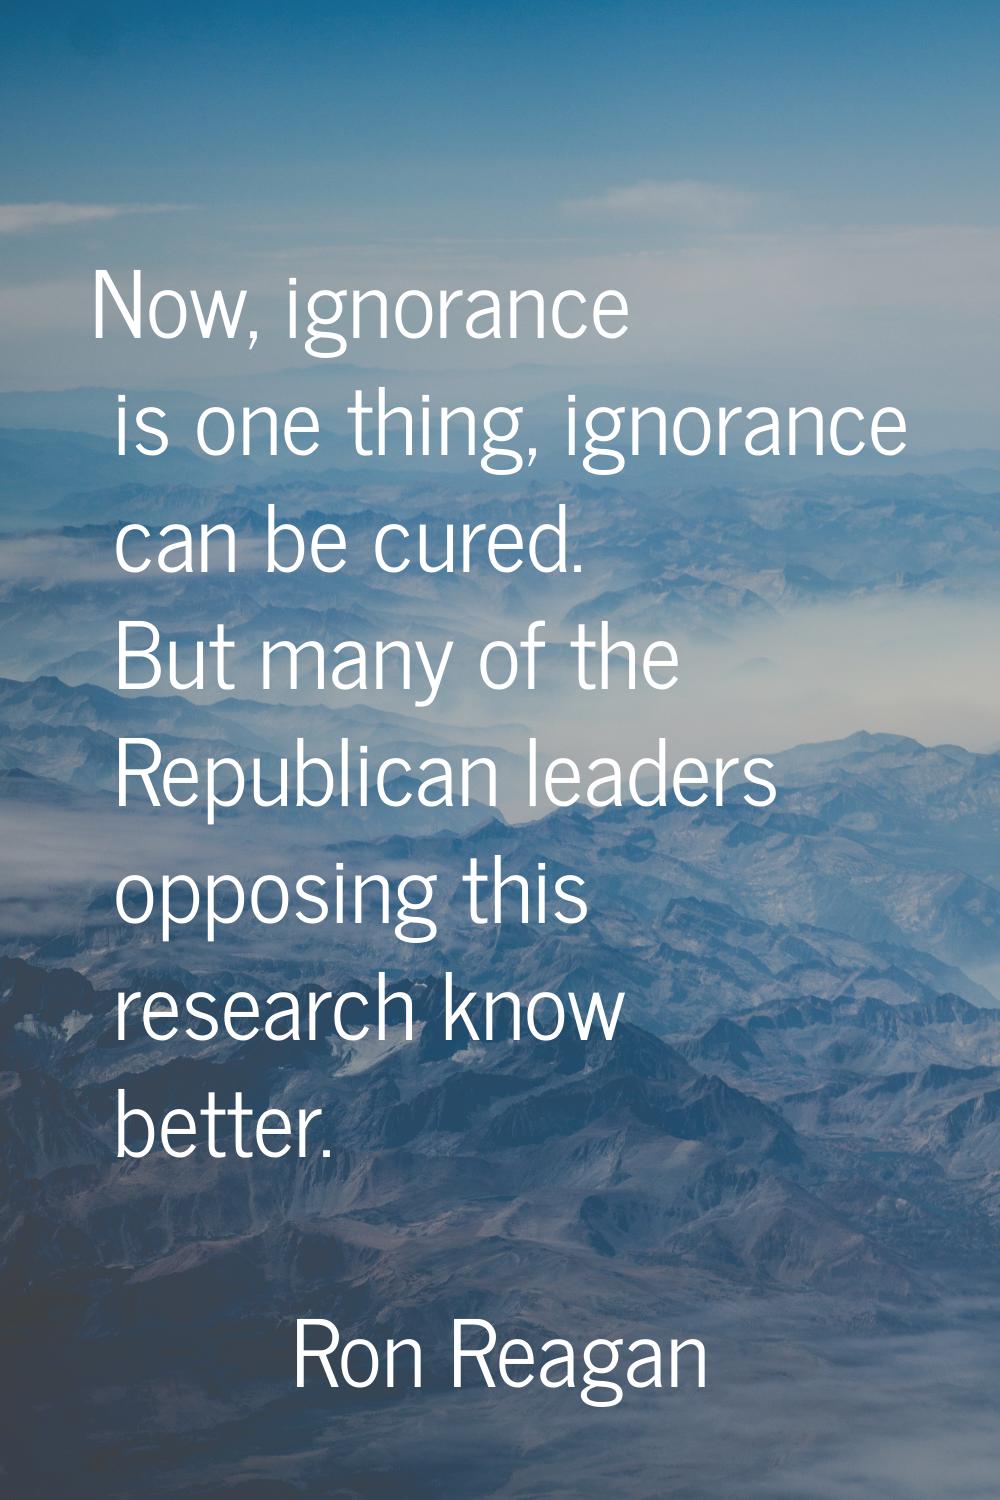 Now, ignorance is one thing, ignorance can be cured. But many of the Republican leaders opposing th